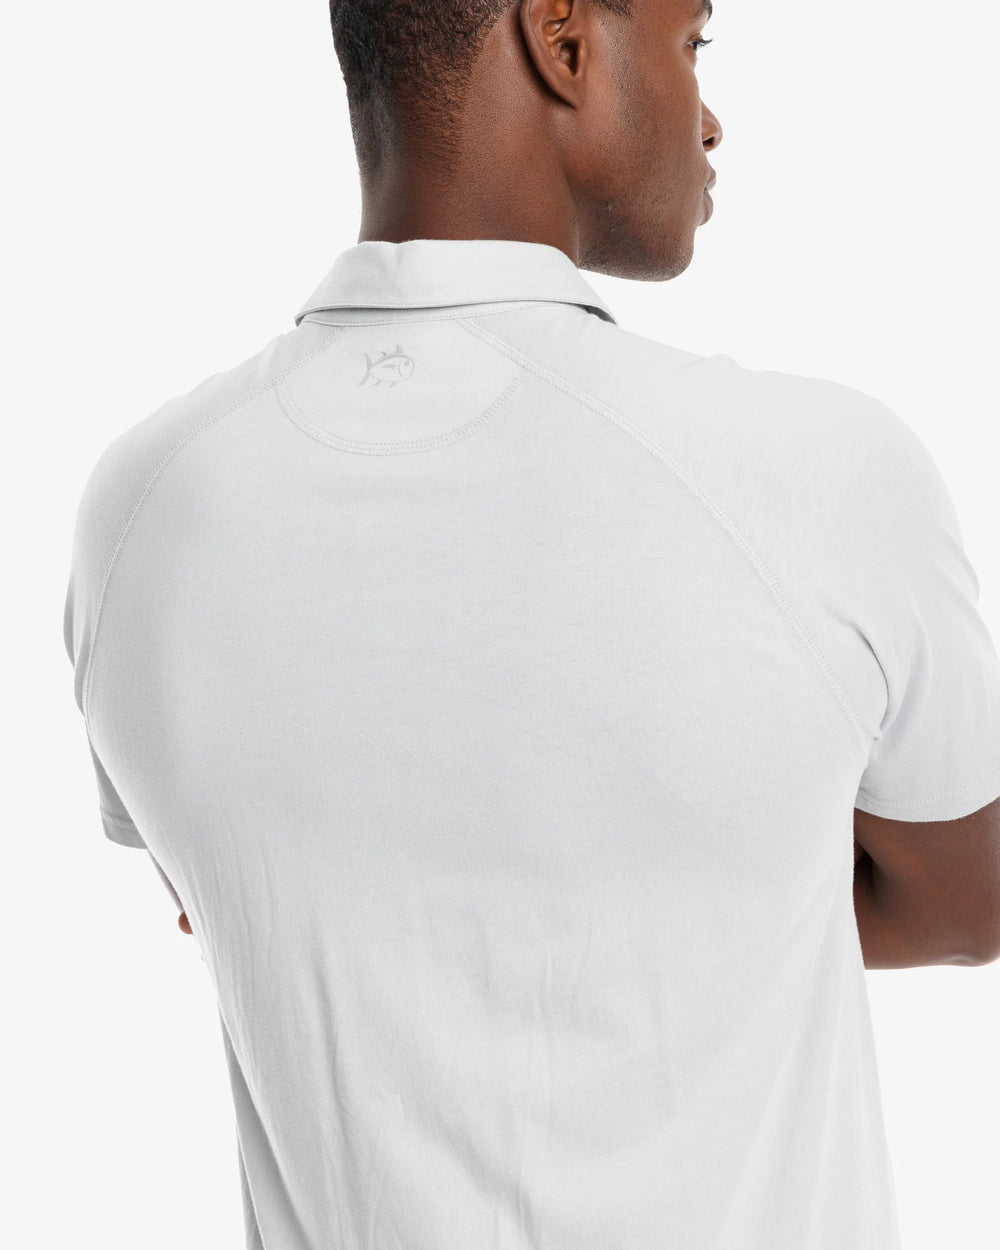 The model yoke view of the Men's Racquet Performance Polo Shirt by Southern Tide - Seagull Grey